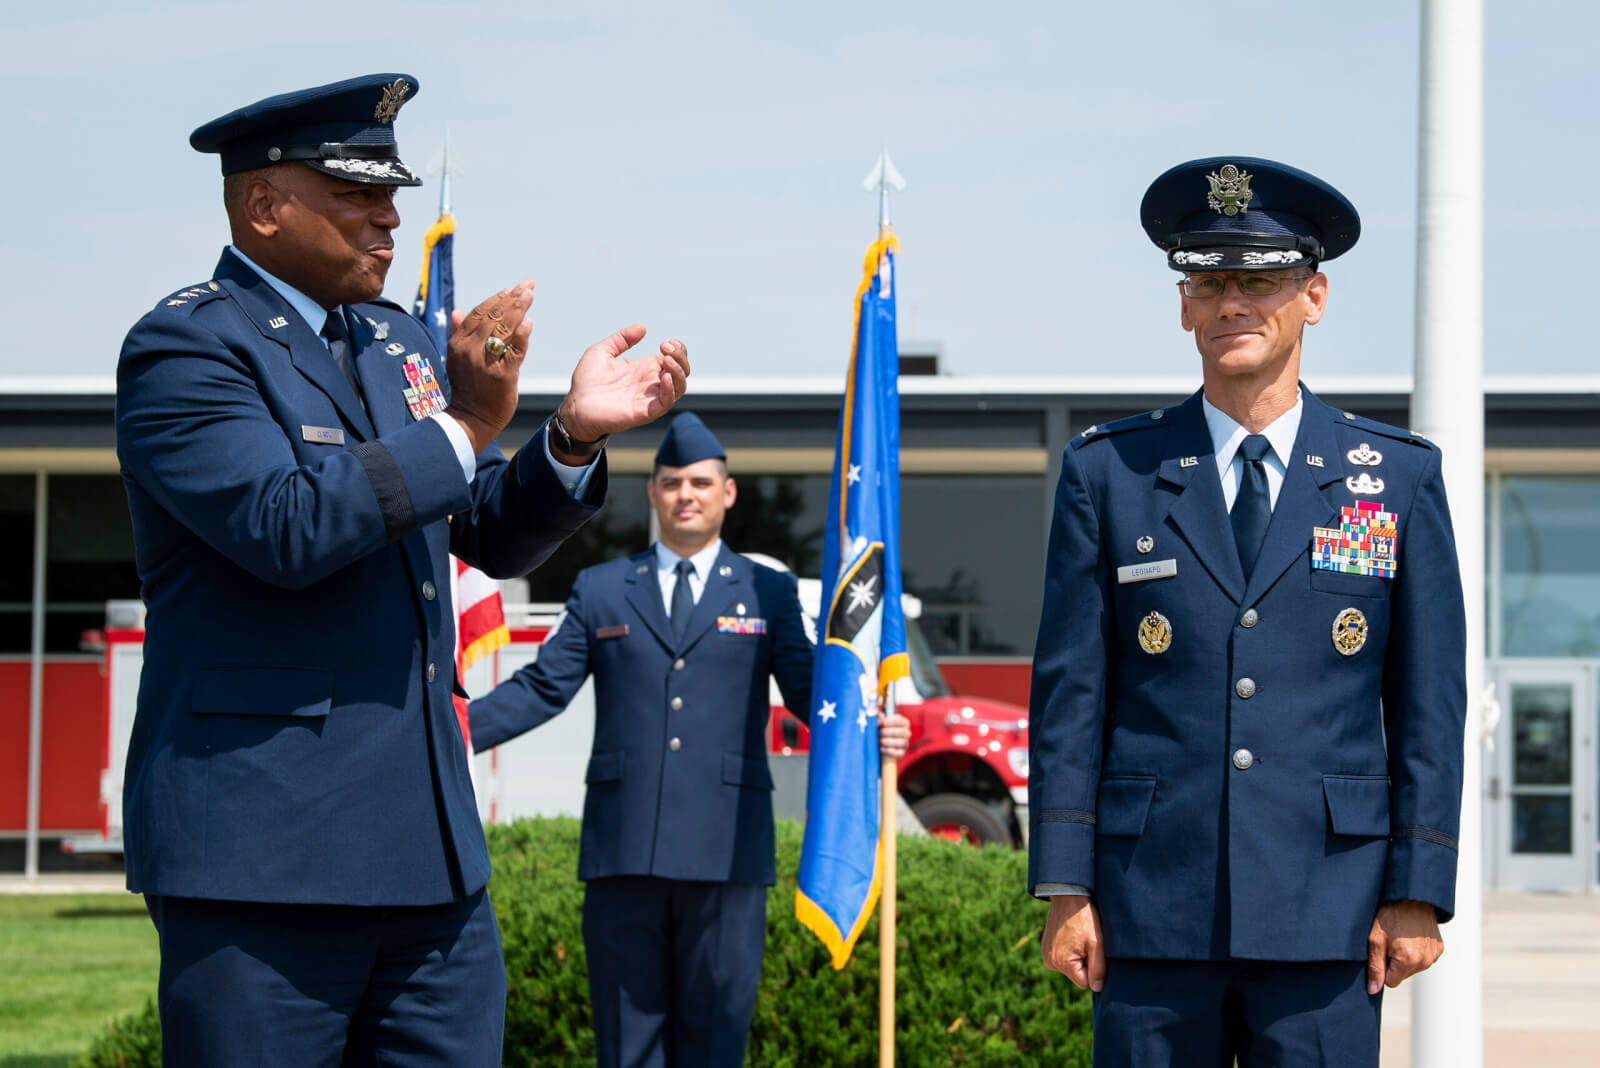 Lieutenant Gen. Richard Clark, superintendent of the Air Force Academy (left), and Col. Christopher Leonard, commander of the 10th Air Base Wing, June 18, 2021